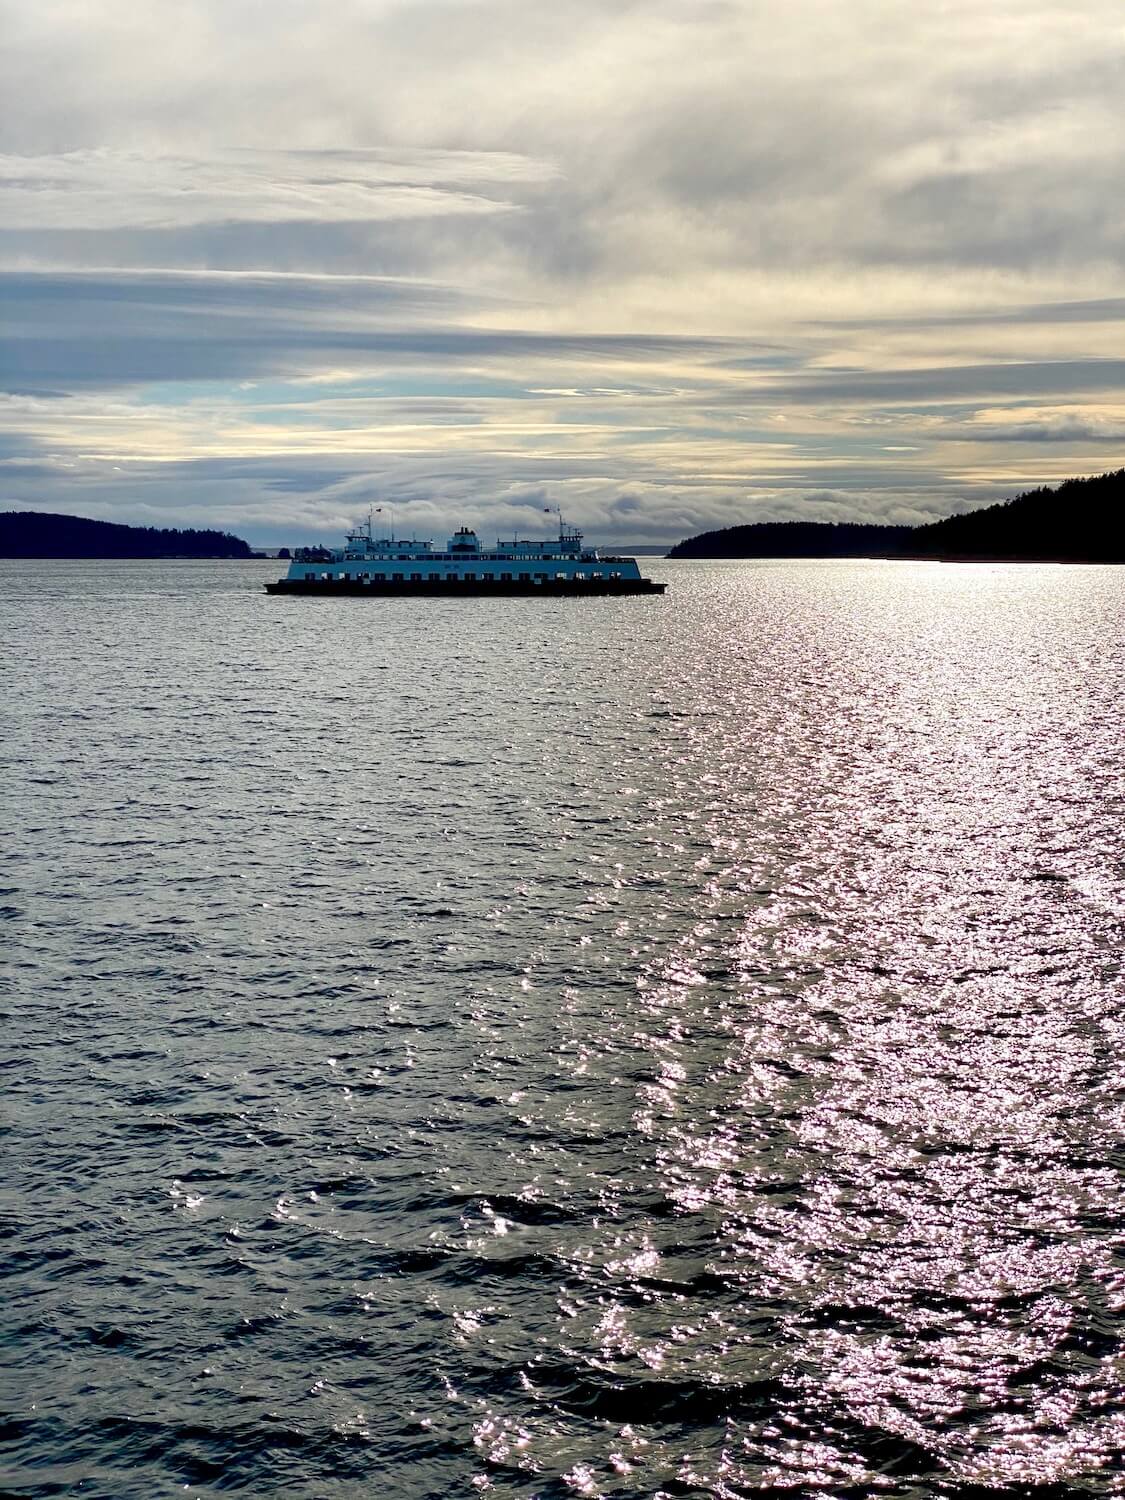 A Washington State Ferry crosses the Puget Sound in between several islands.  The two level ferry is white with a darker color on the base near the water and the see has small choppy waves that glow with the winter sky hosting a sunset. 